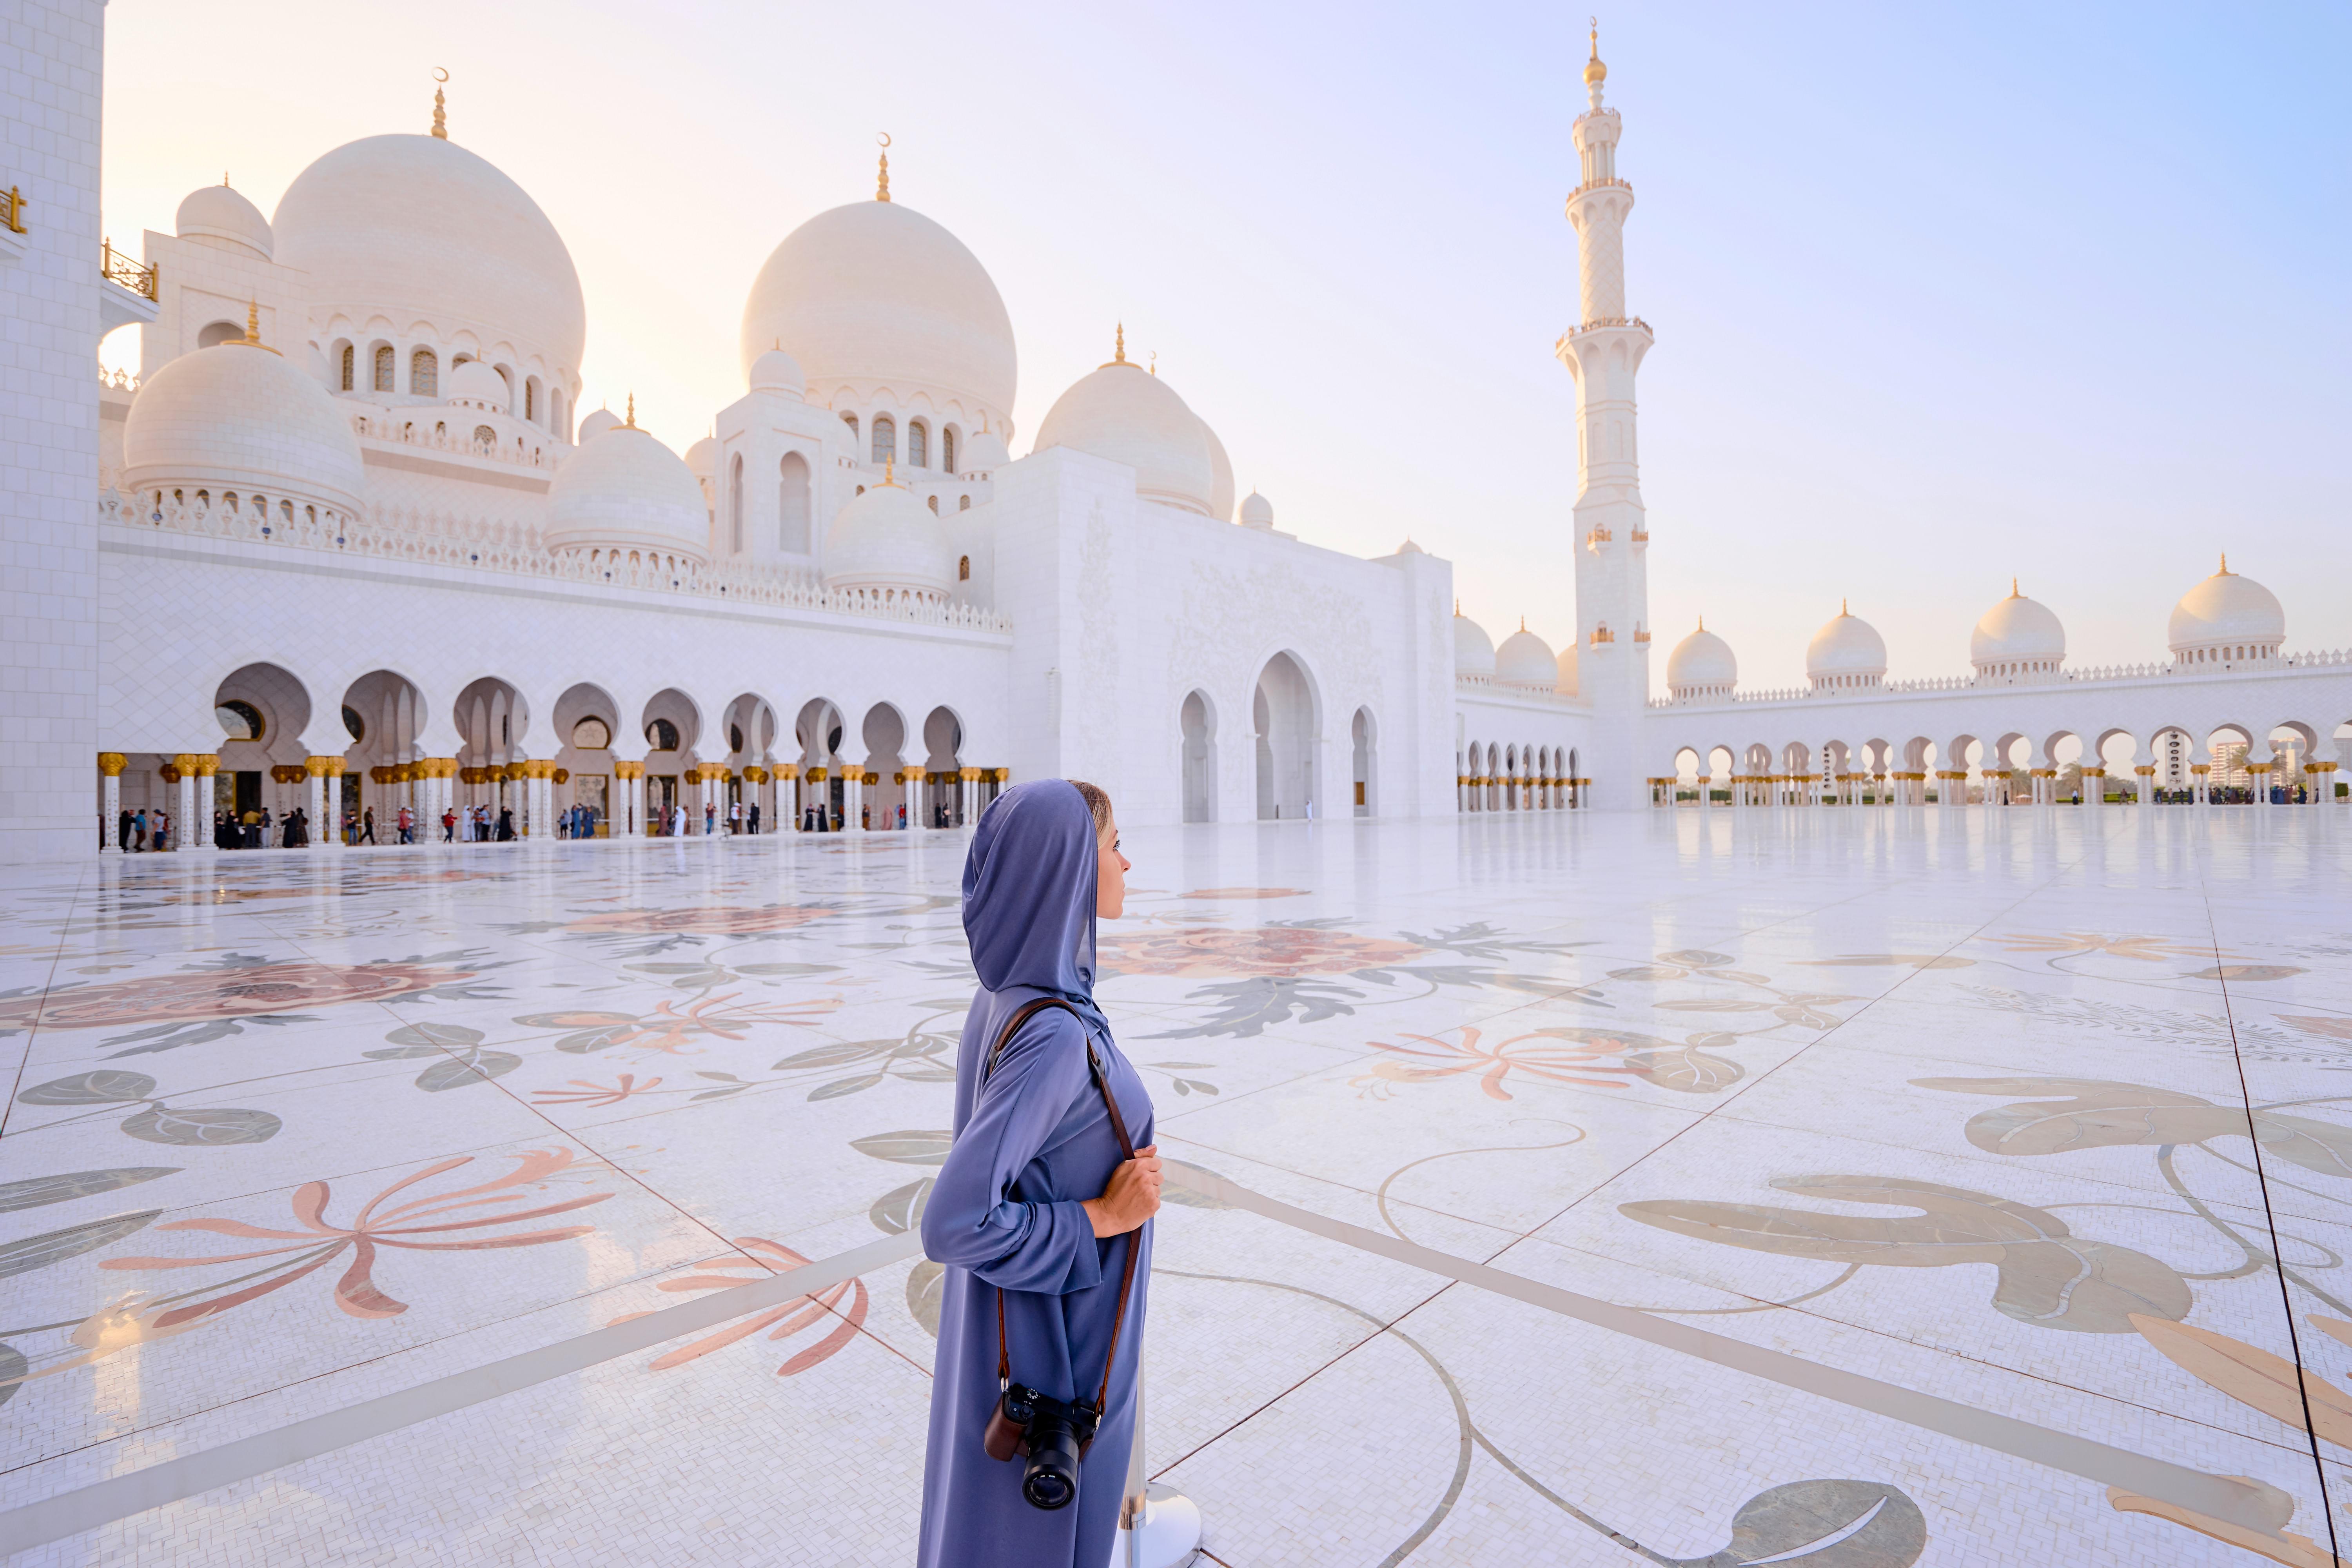 Gril admiring the Sheikh Zayed Grand Mosque